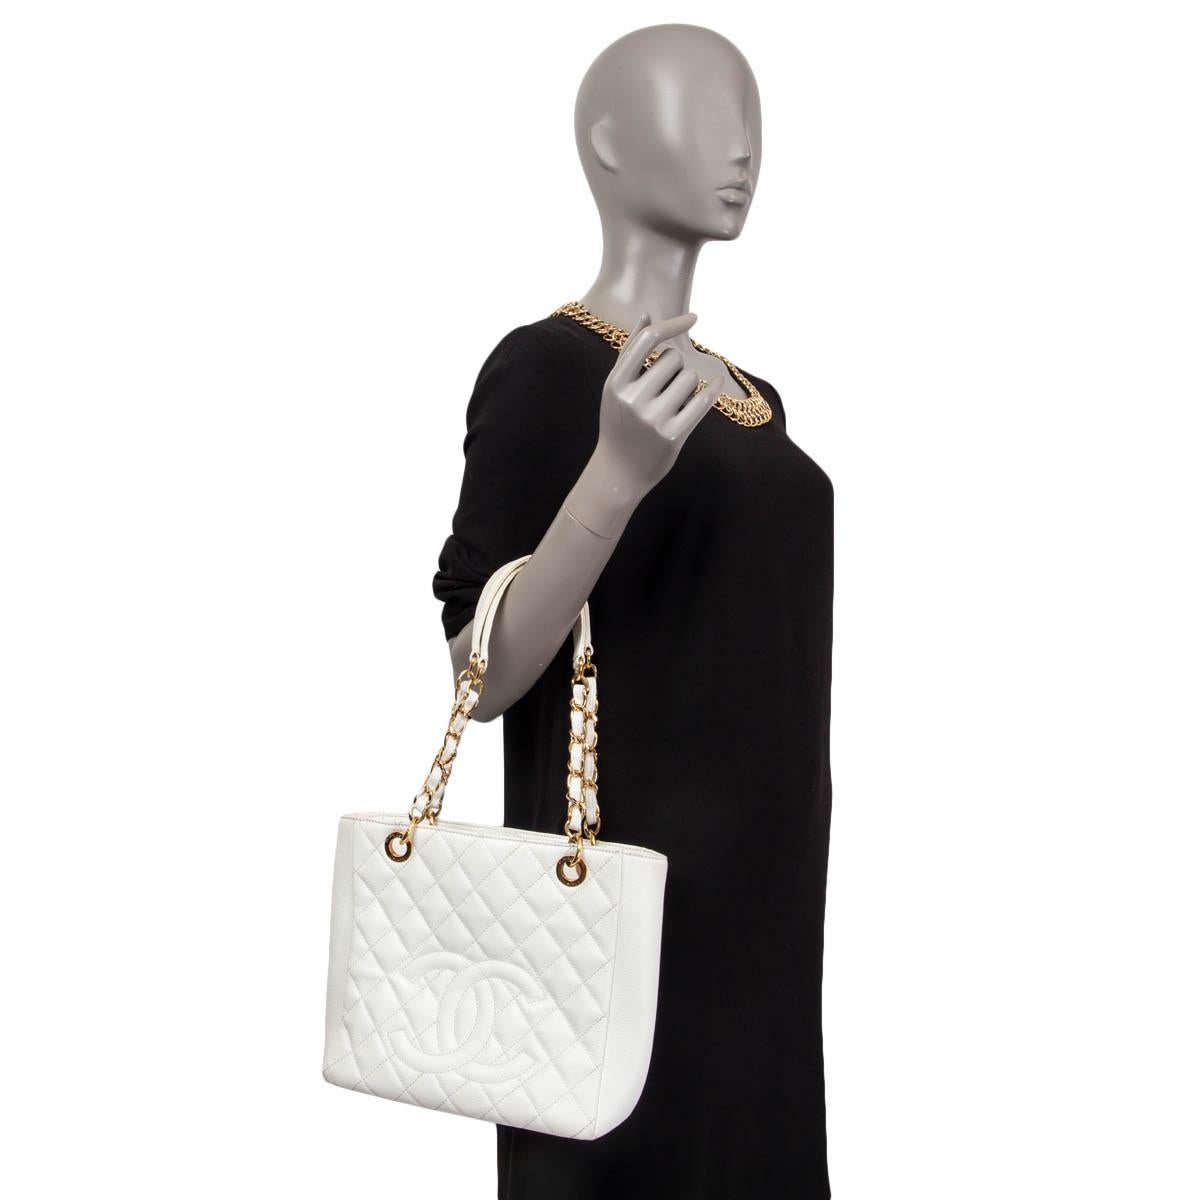 CHANEL white Caviar leather PETITE SHOPPING TOTE PST Bag 2